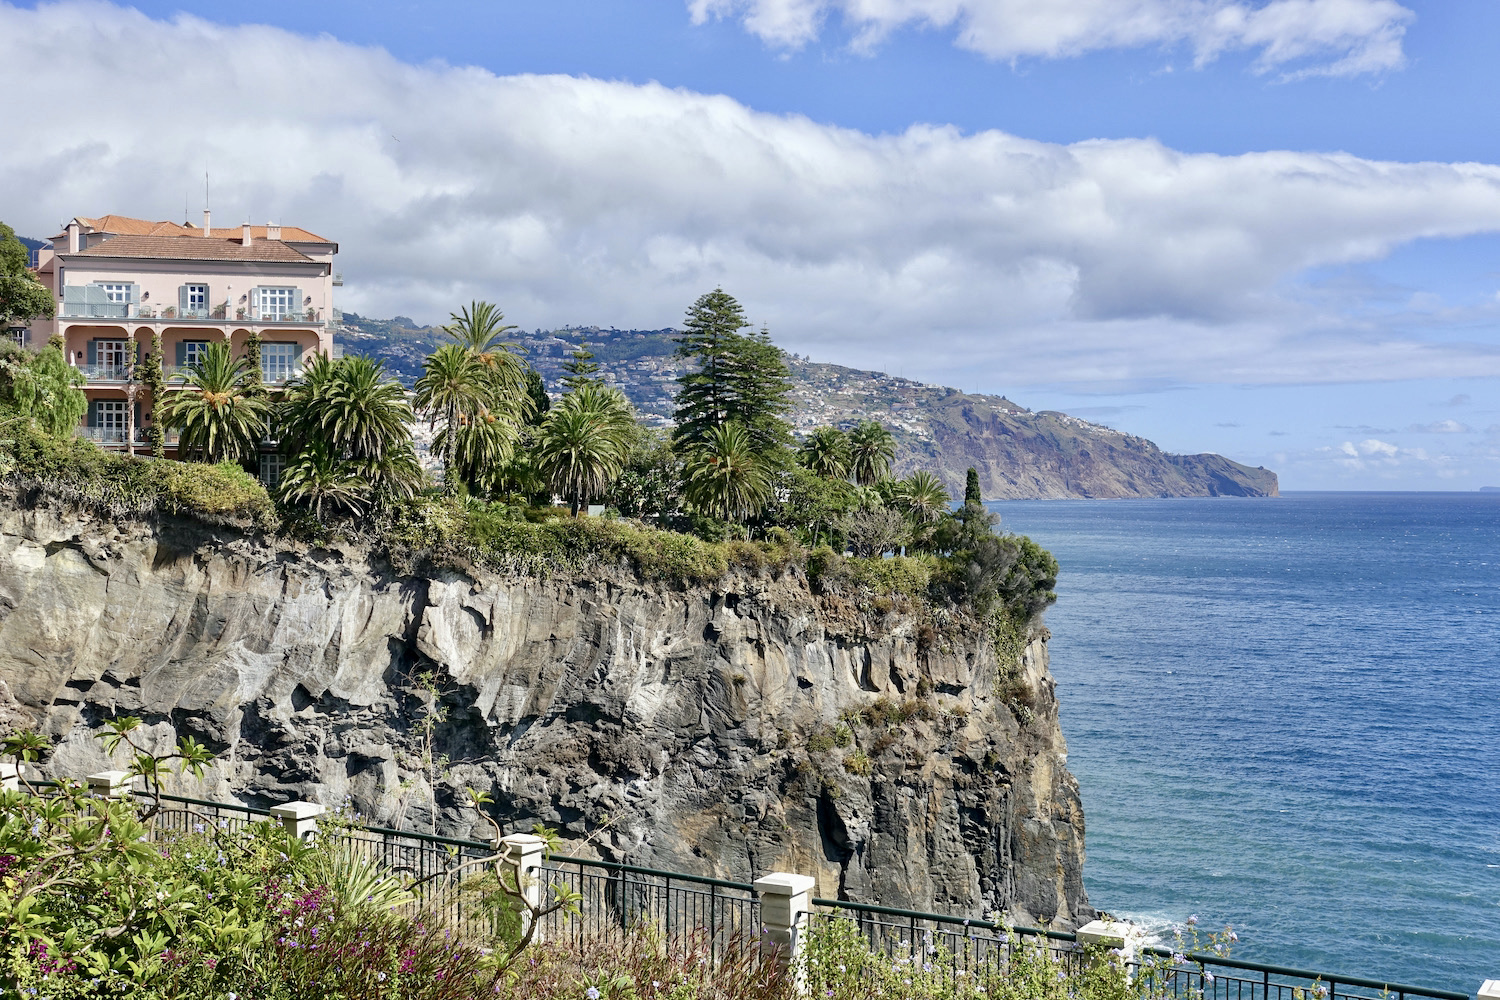 historic building & botanical gardens at Reid's Palace in Madeira, Portugal